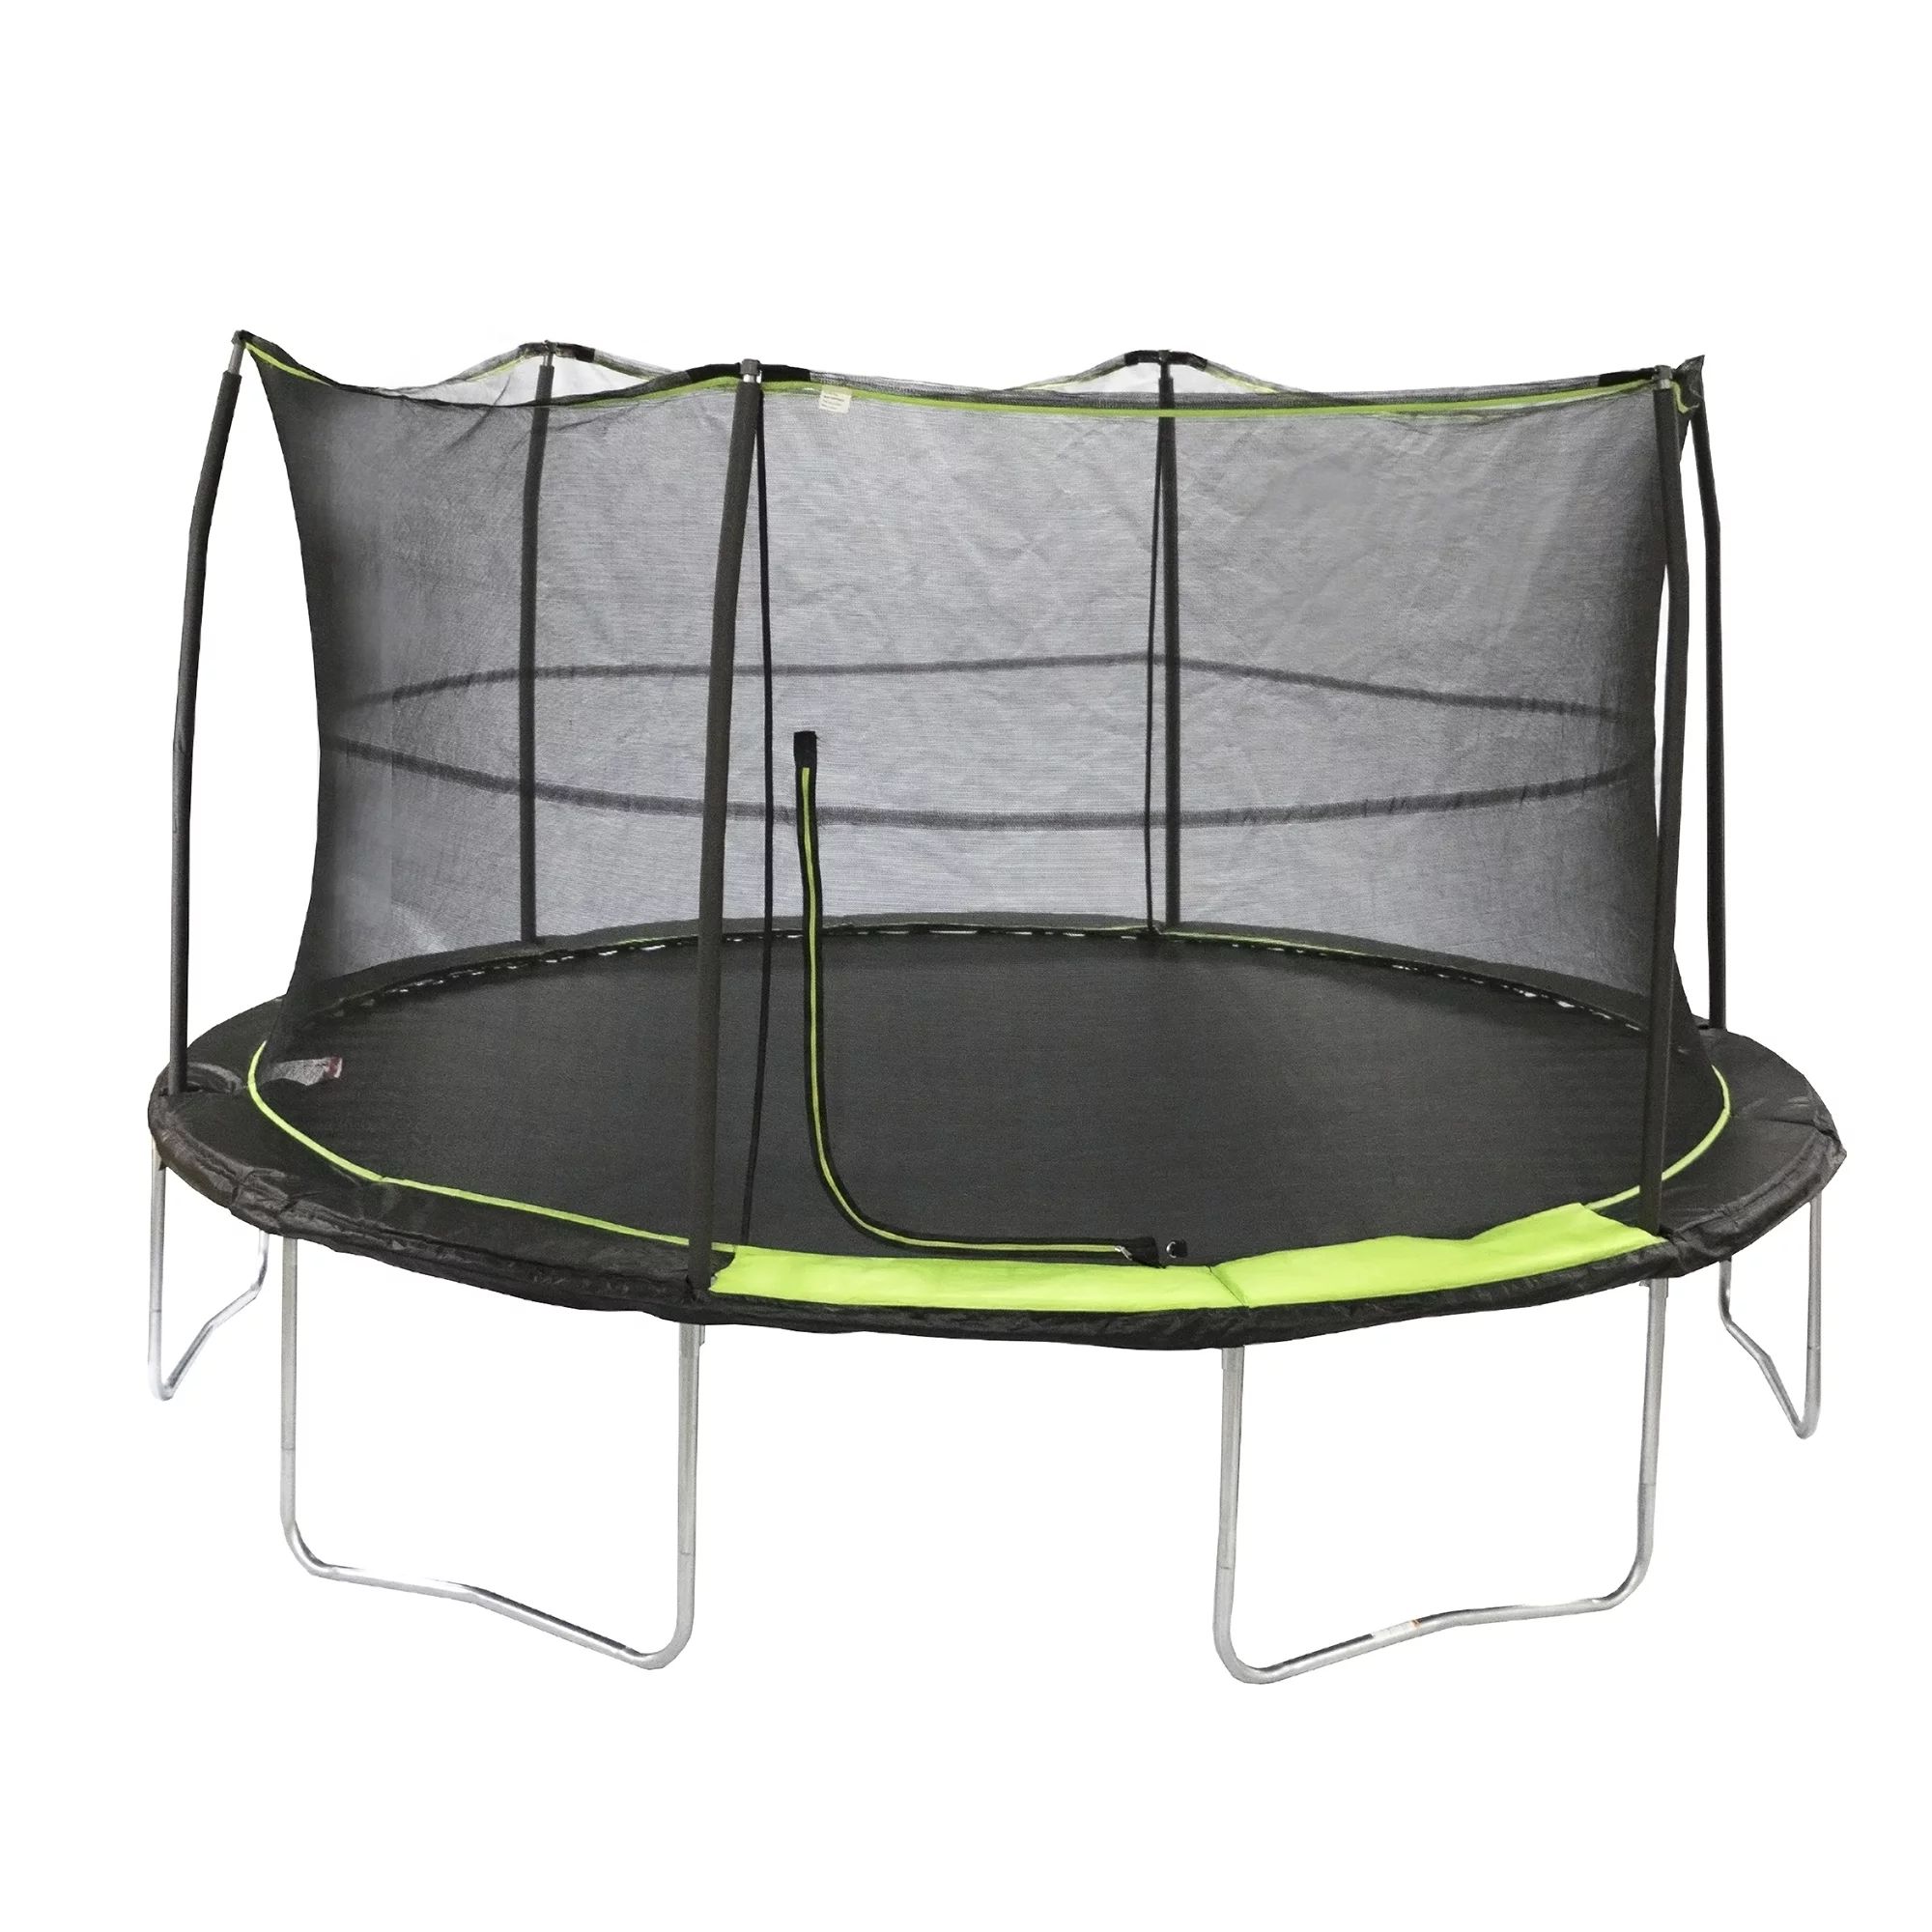 JumpKing 14ft Trampoline with Safety Enclosure, 200lb Weight Limit Black Lime Green | Walmart (US)